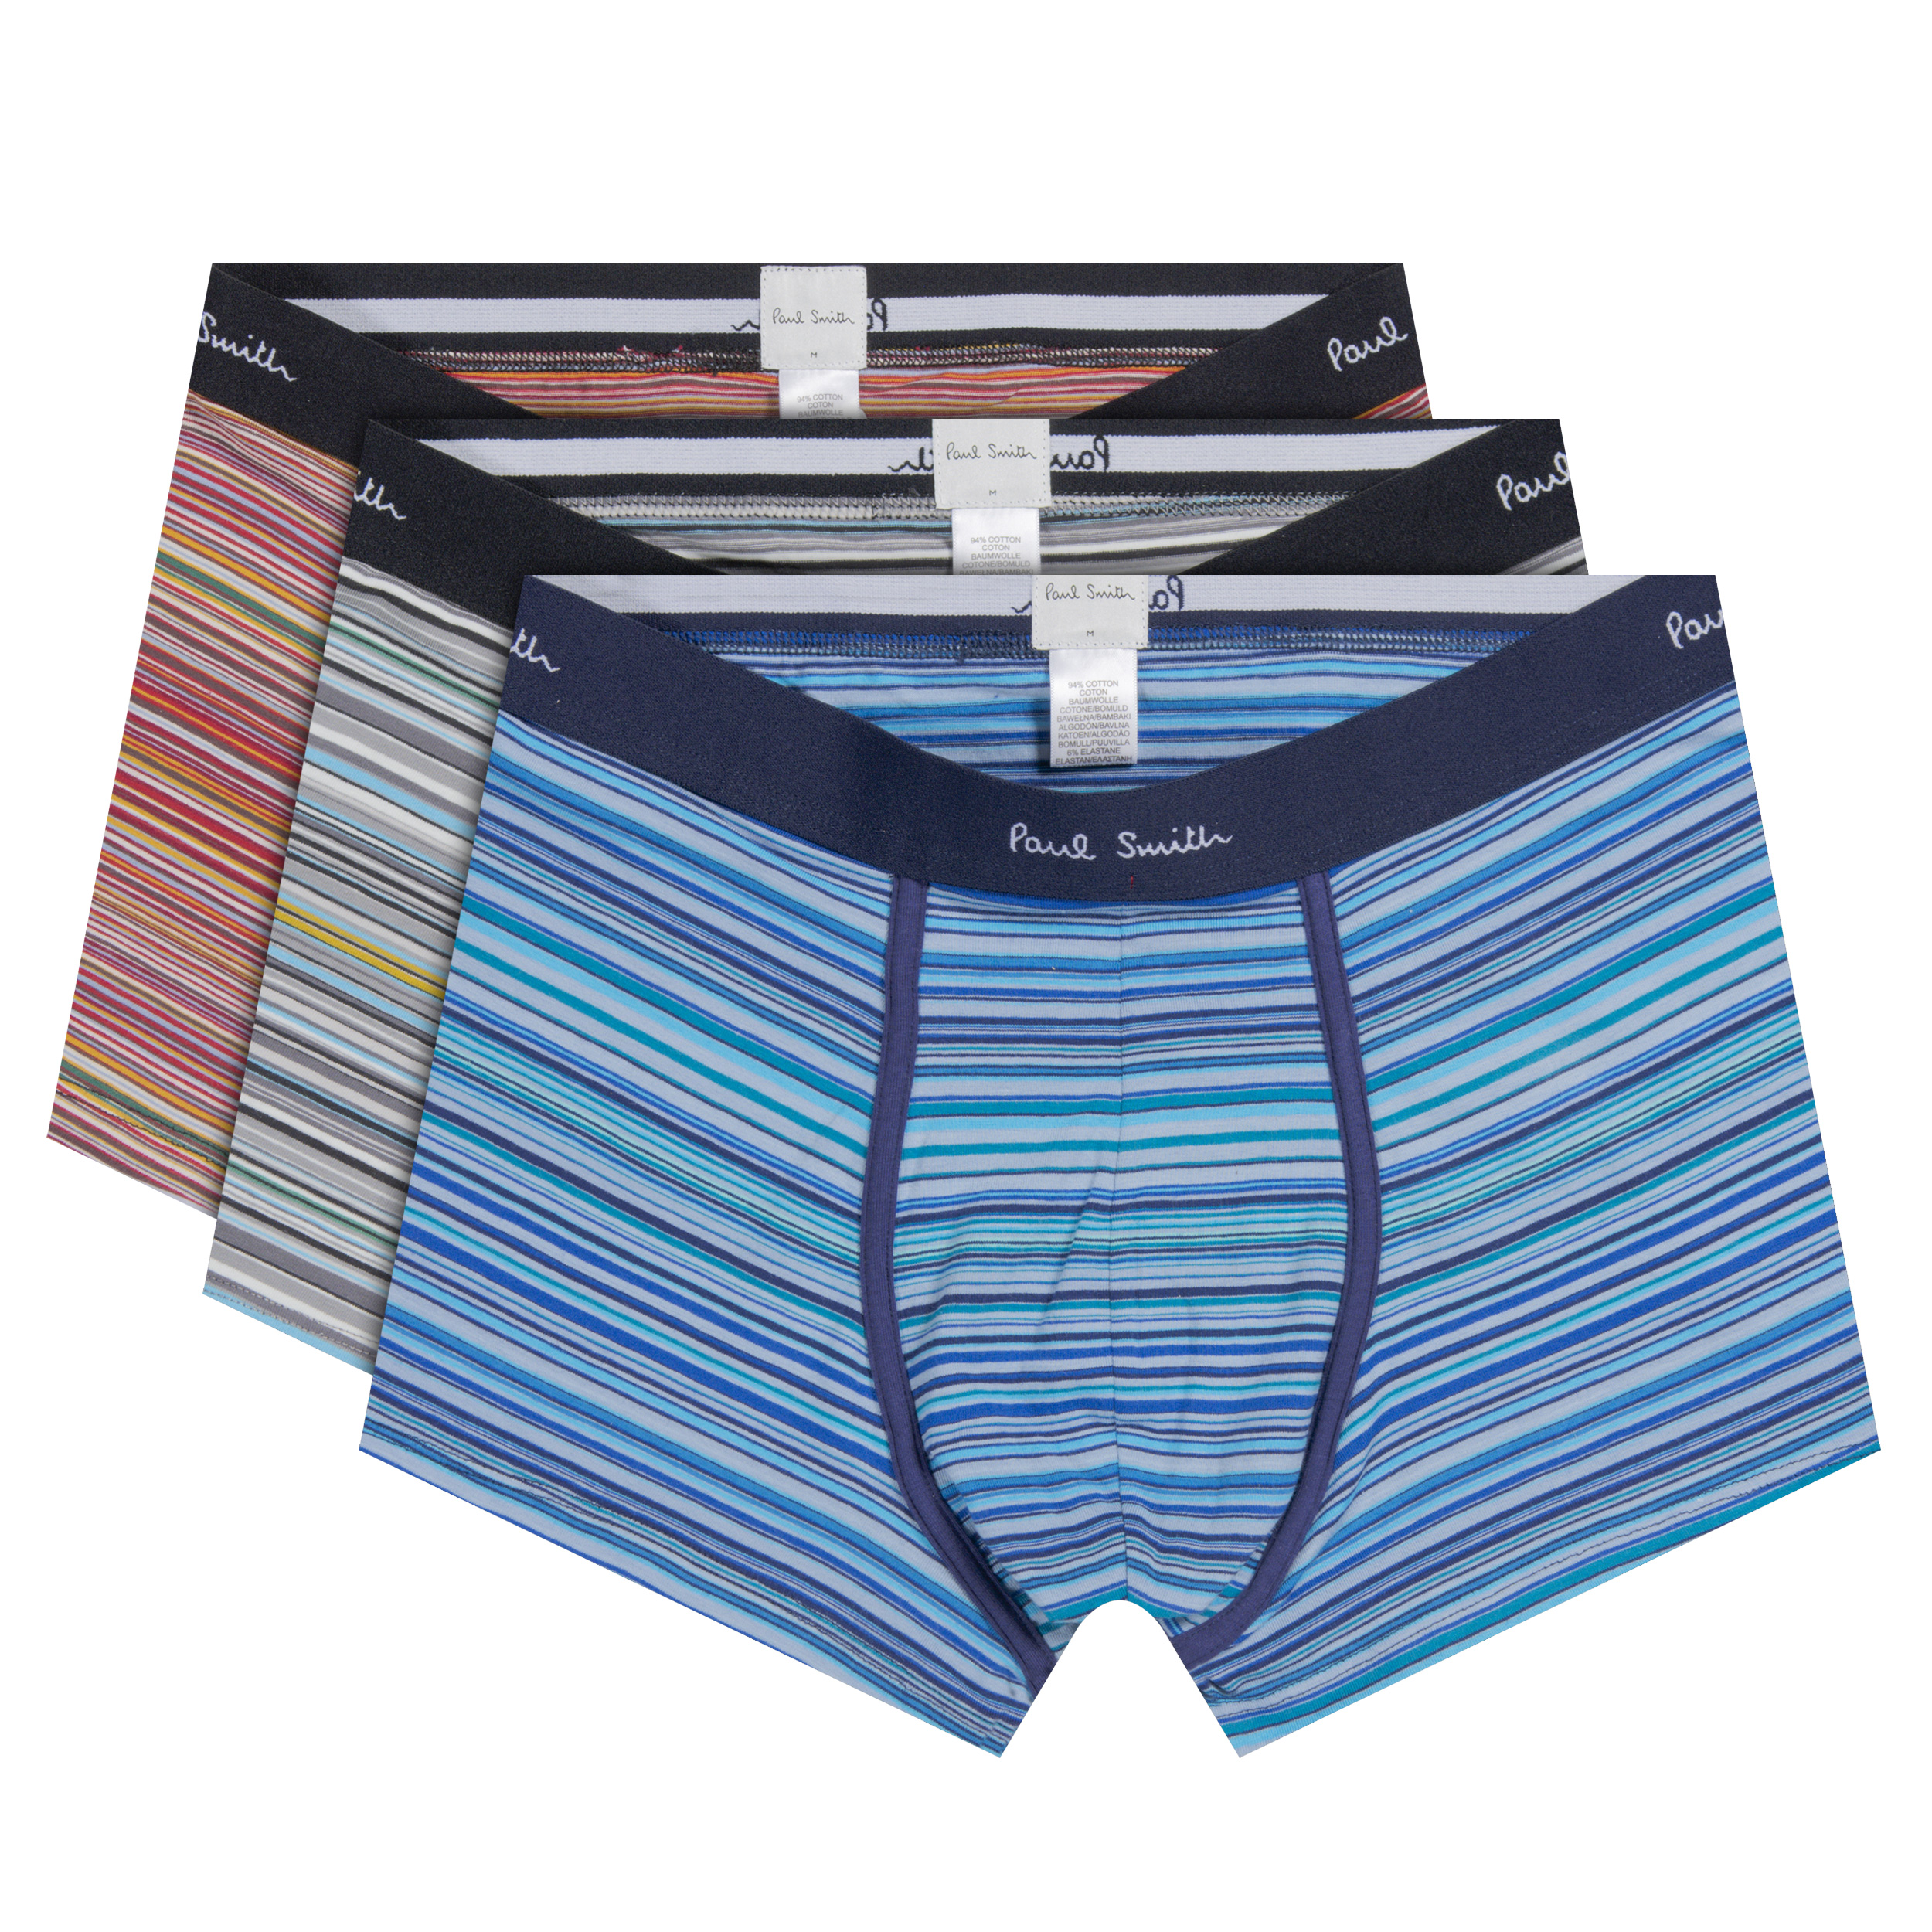 Paul Smith '3-Pack' Boxer Trunk Multi